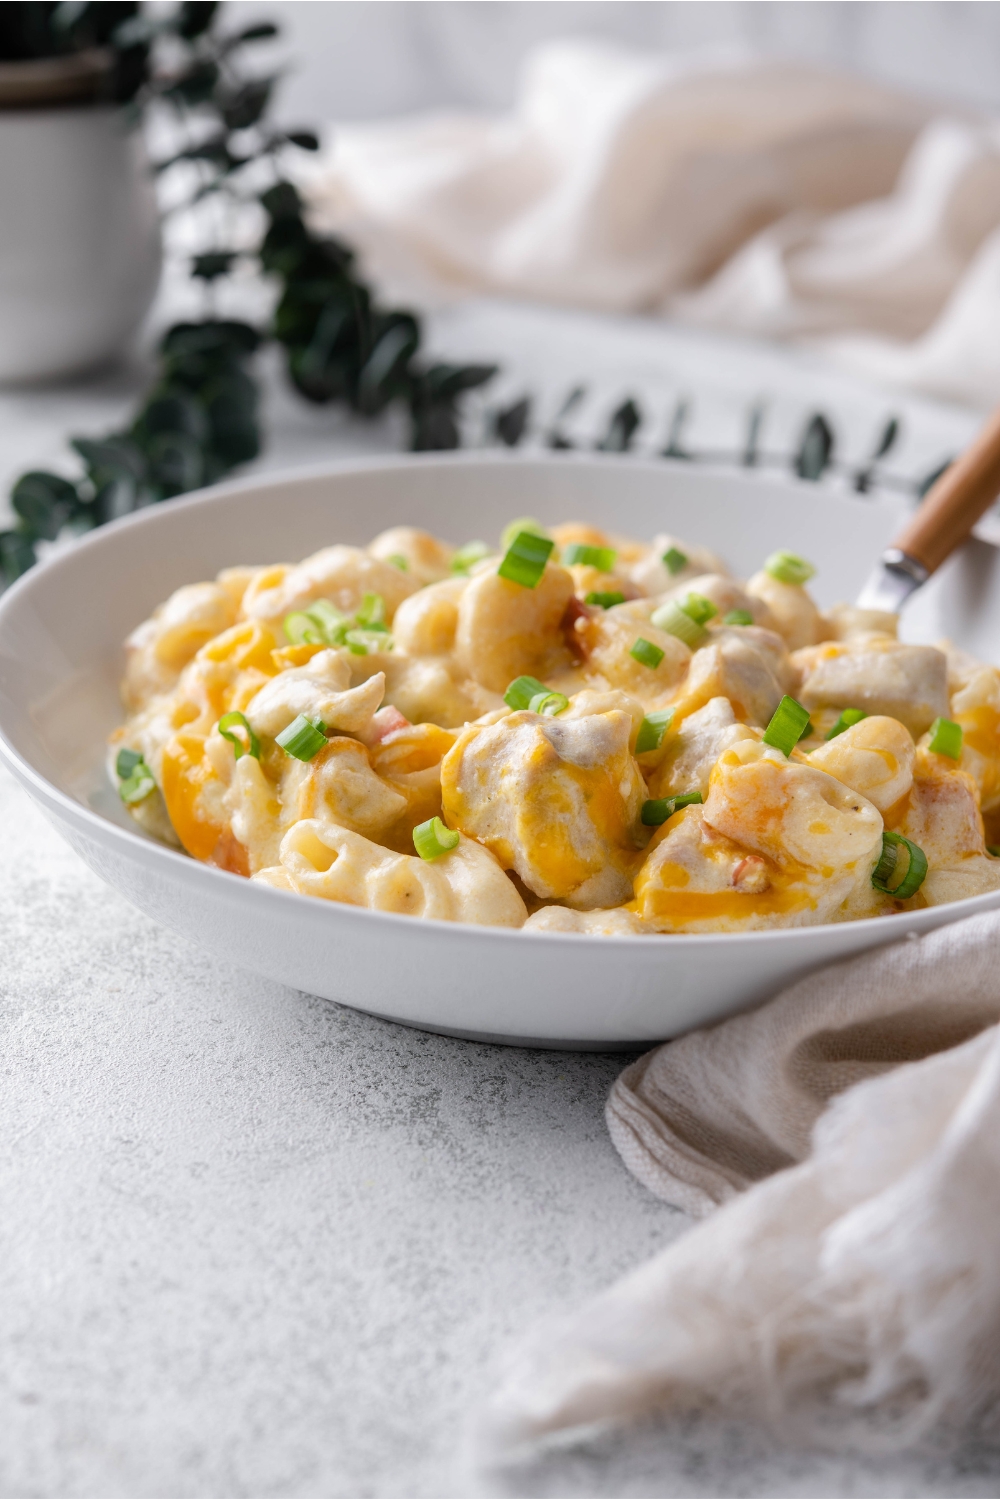 A bowl of chicken pasta casserole covered in cream sauce with melted cheddar cheese and chopped green onions. There is a fork in the bowl.